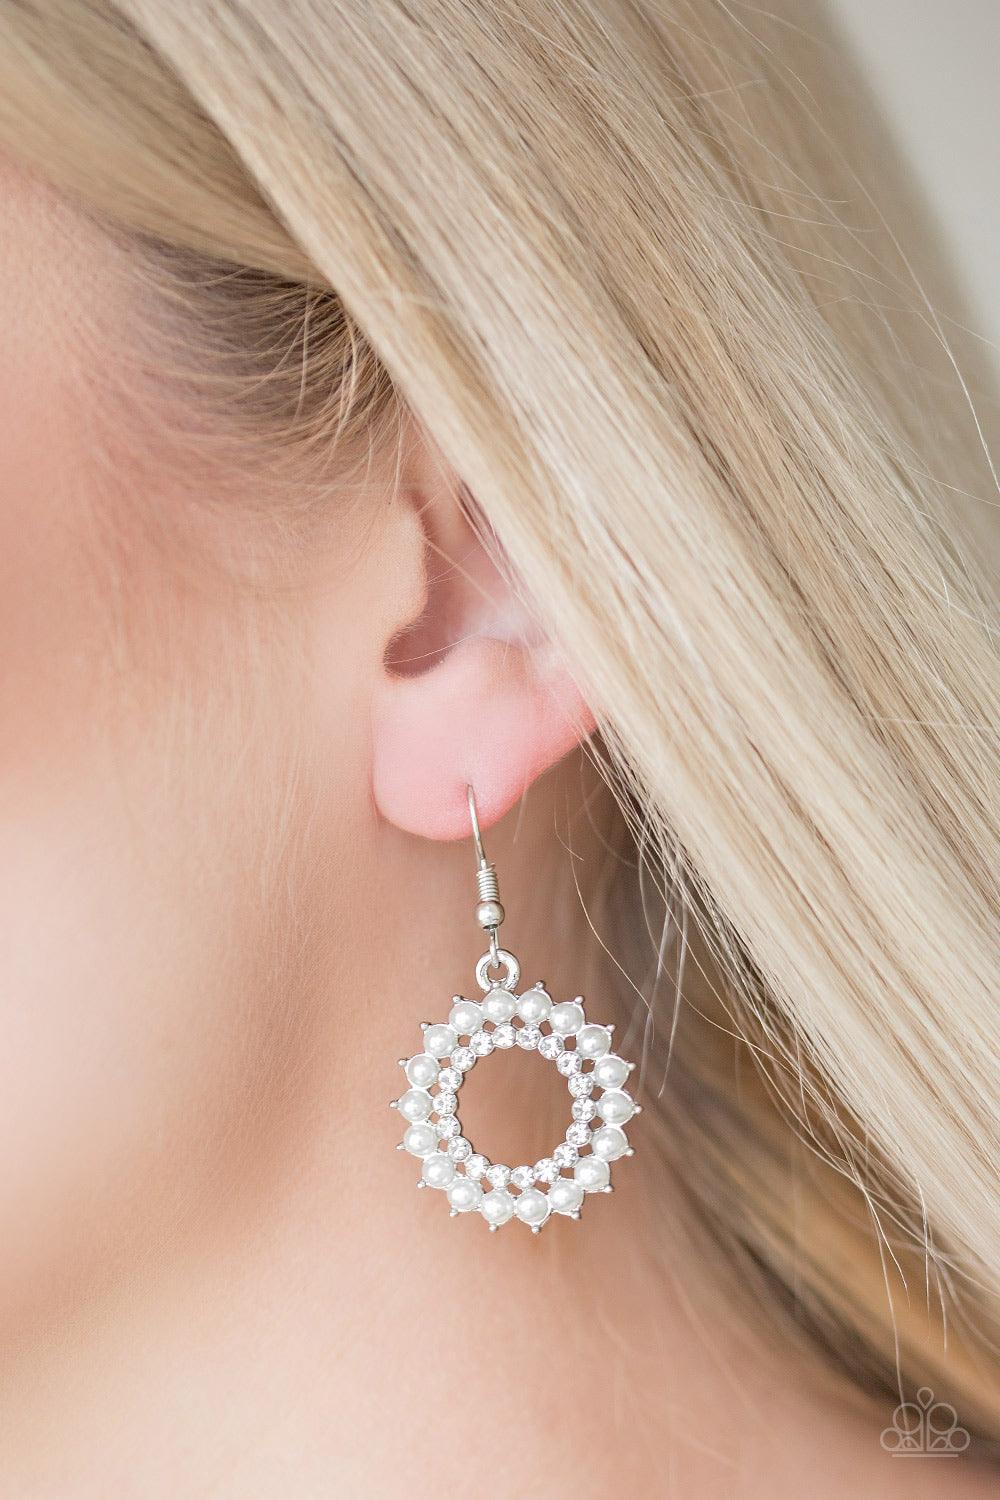  Paparazzi Accessories-Wreathed In Radiance - White Earrings